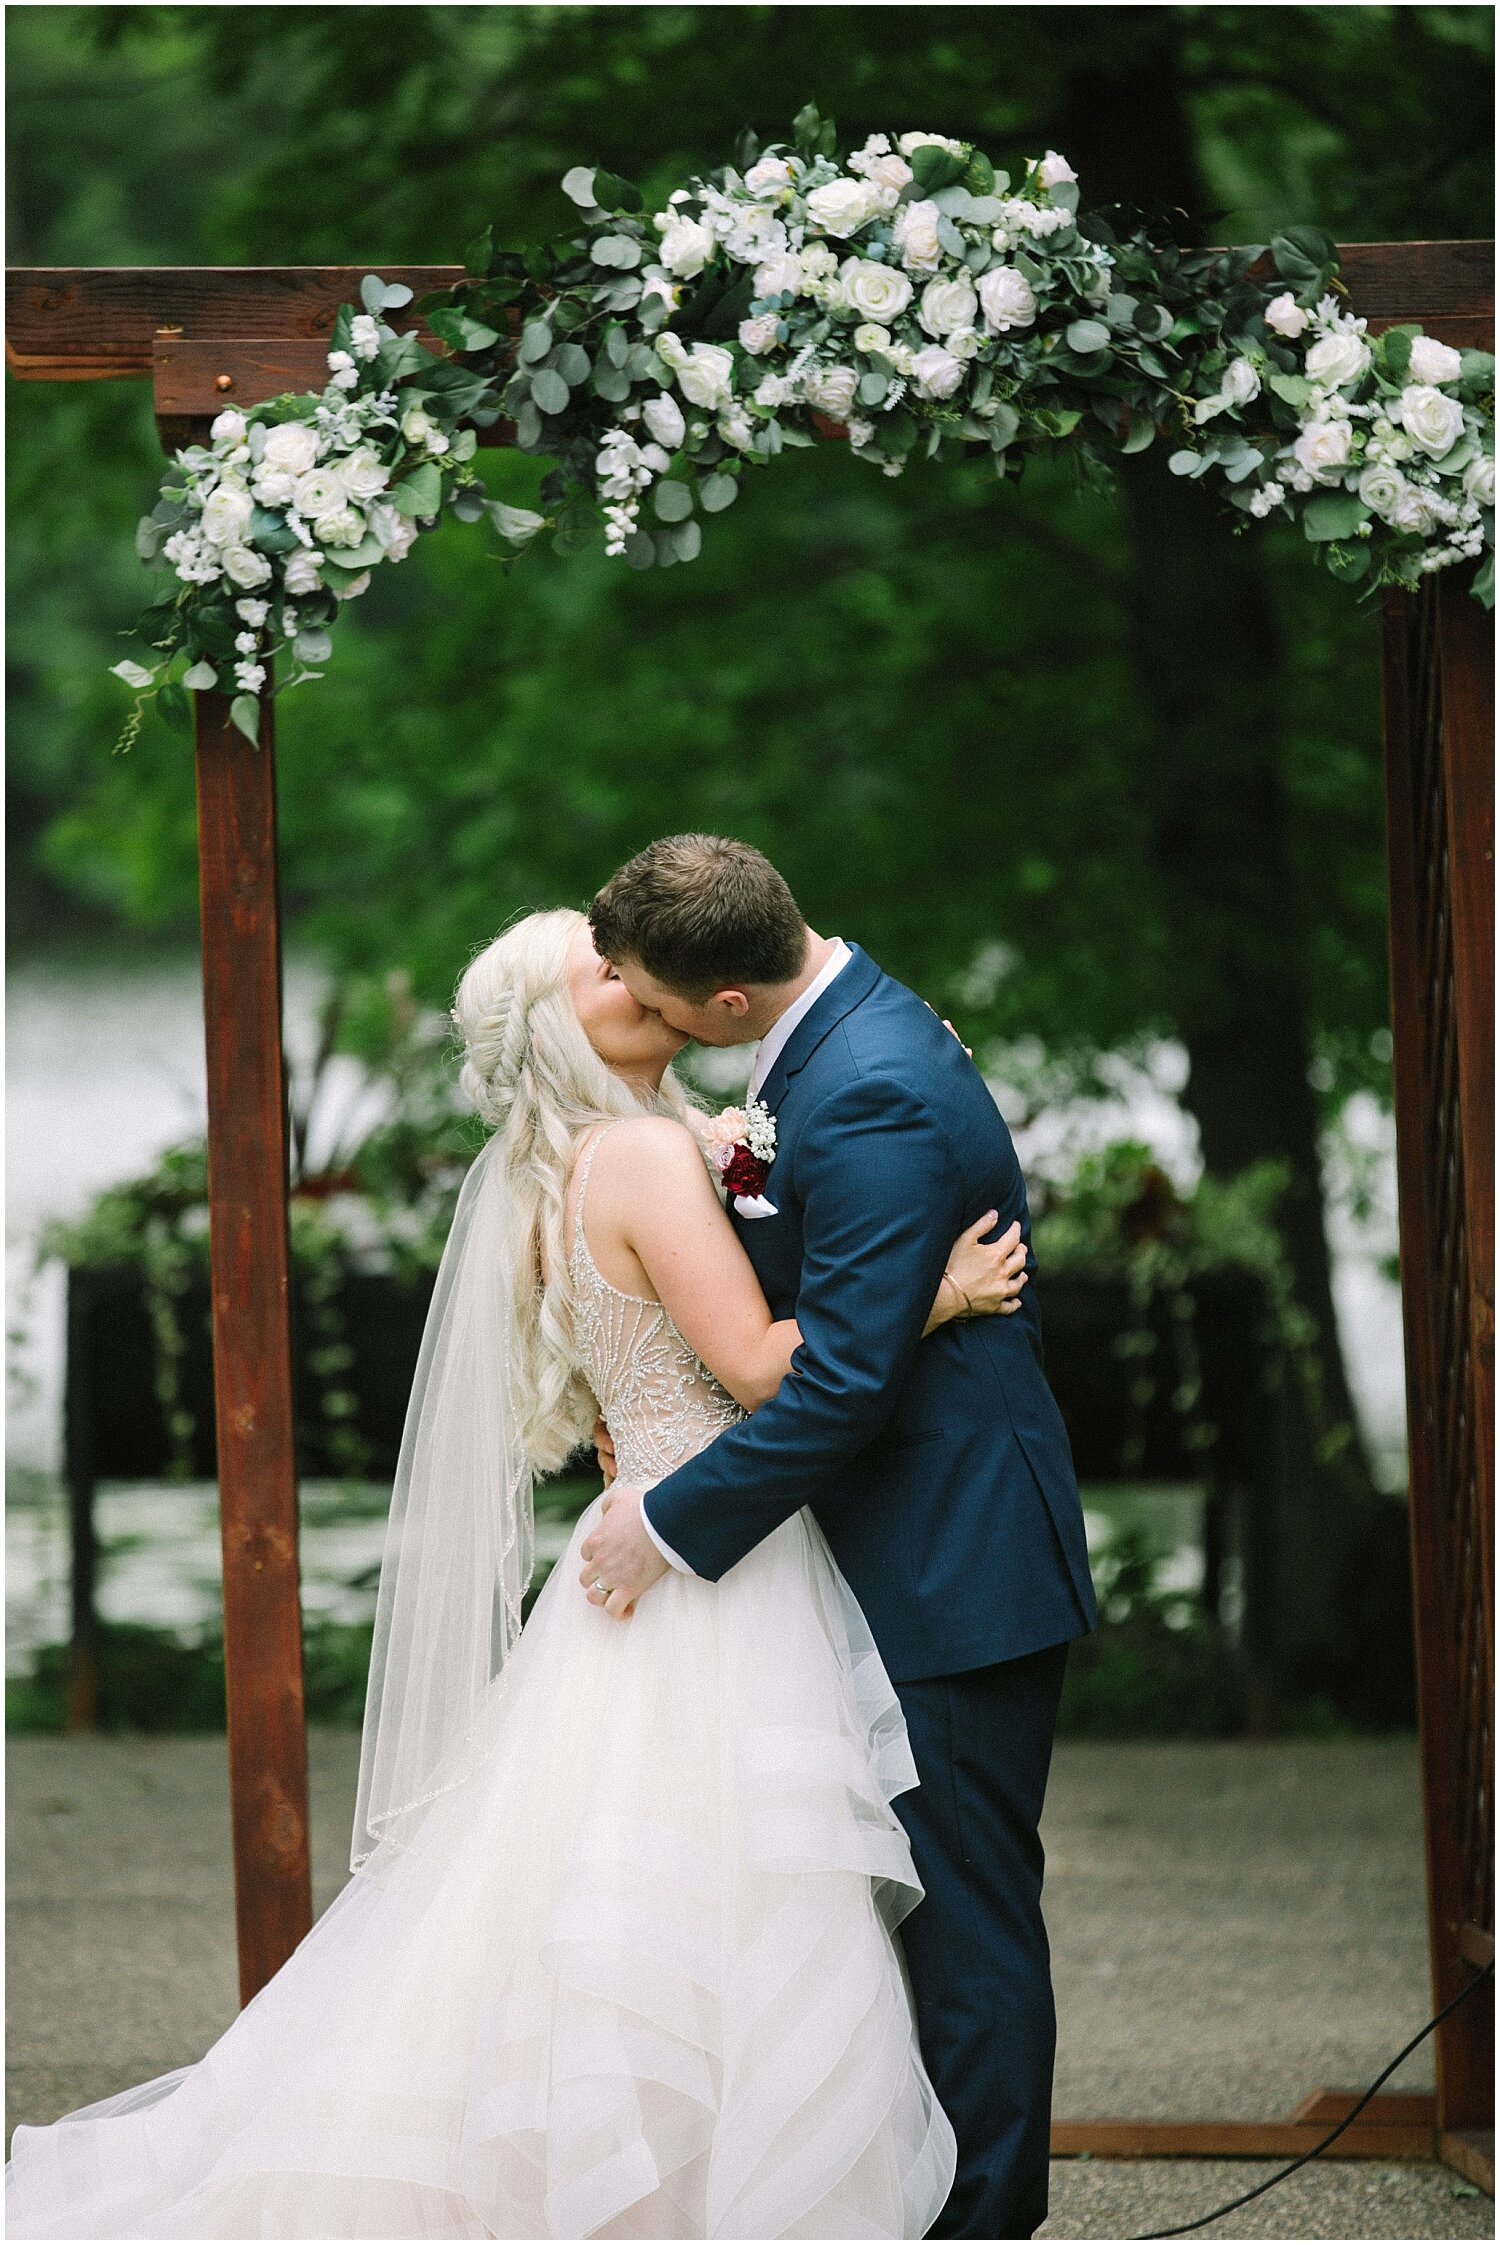  bride and groom kiss as they say I do at their outdoor wedding ceremony 